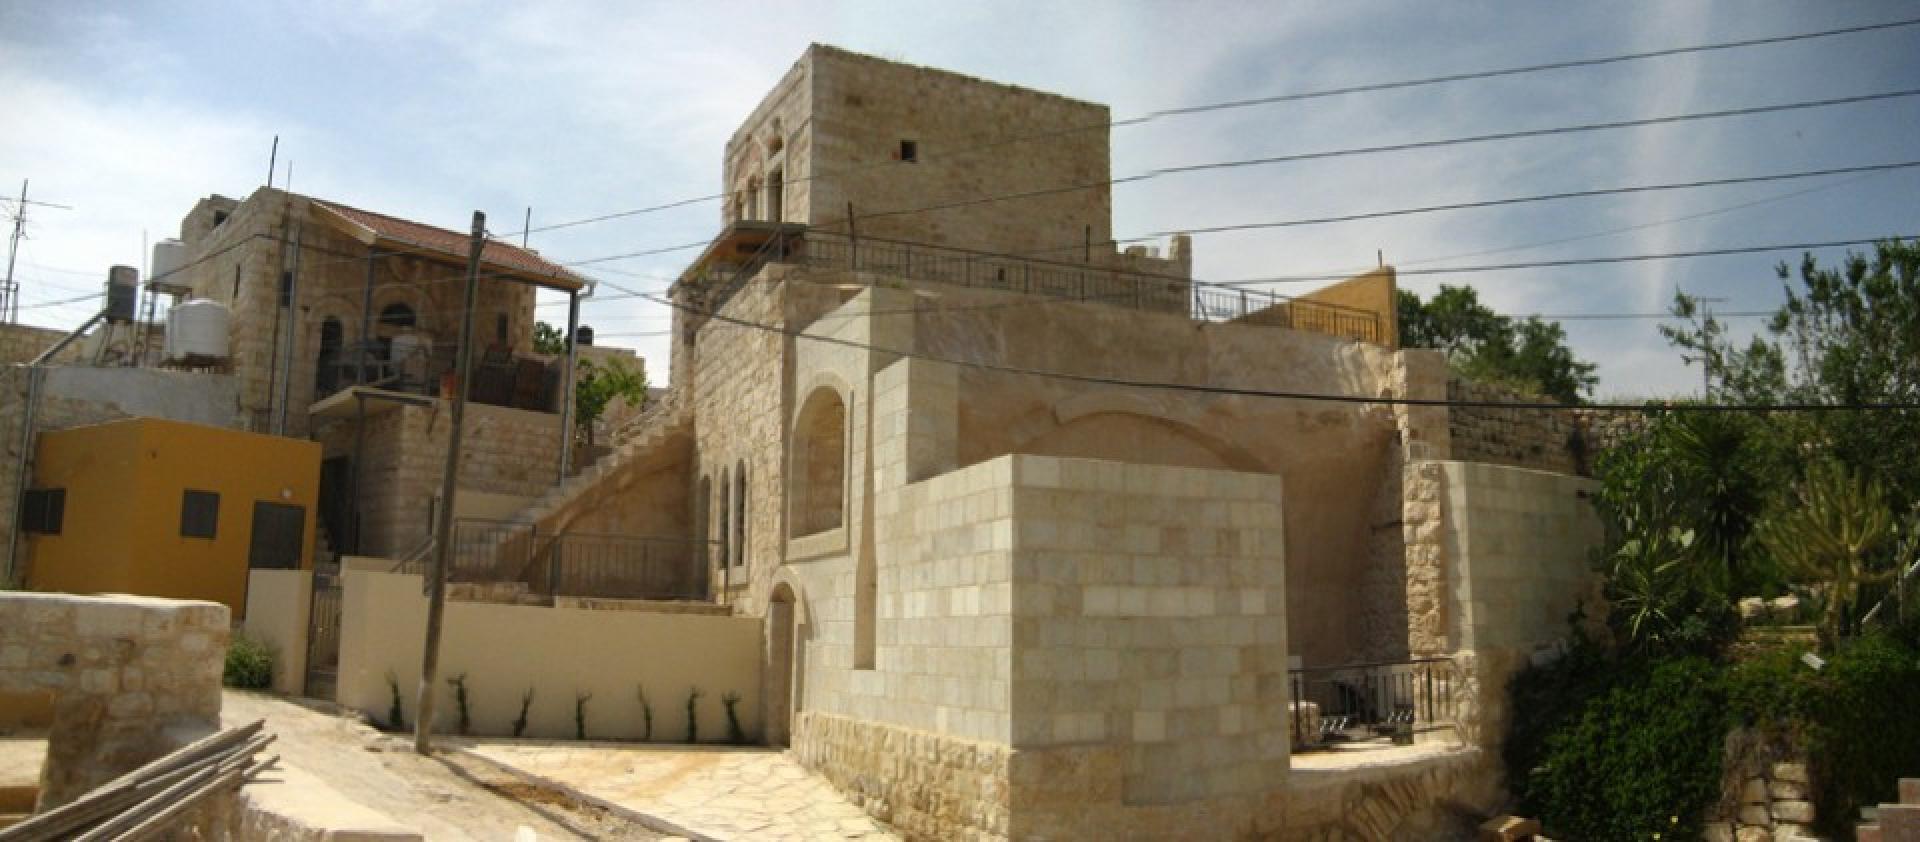 Riwaq is a centre for architectural conservation and restoration of architectural heritage in Palestine. | Photo via Spatial Agency